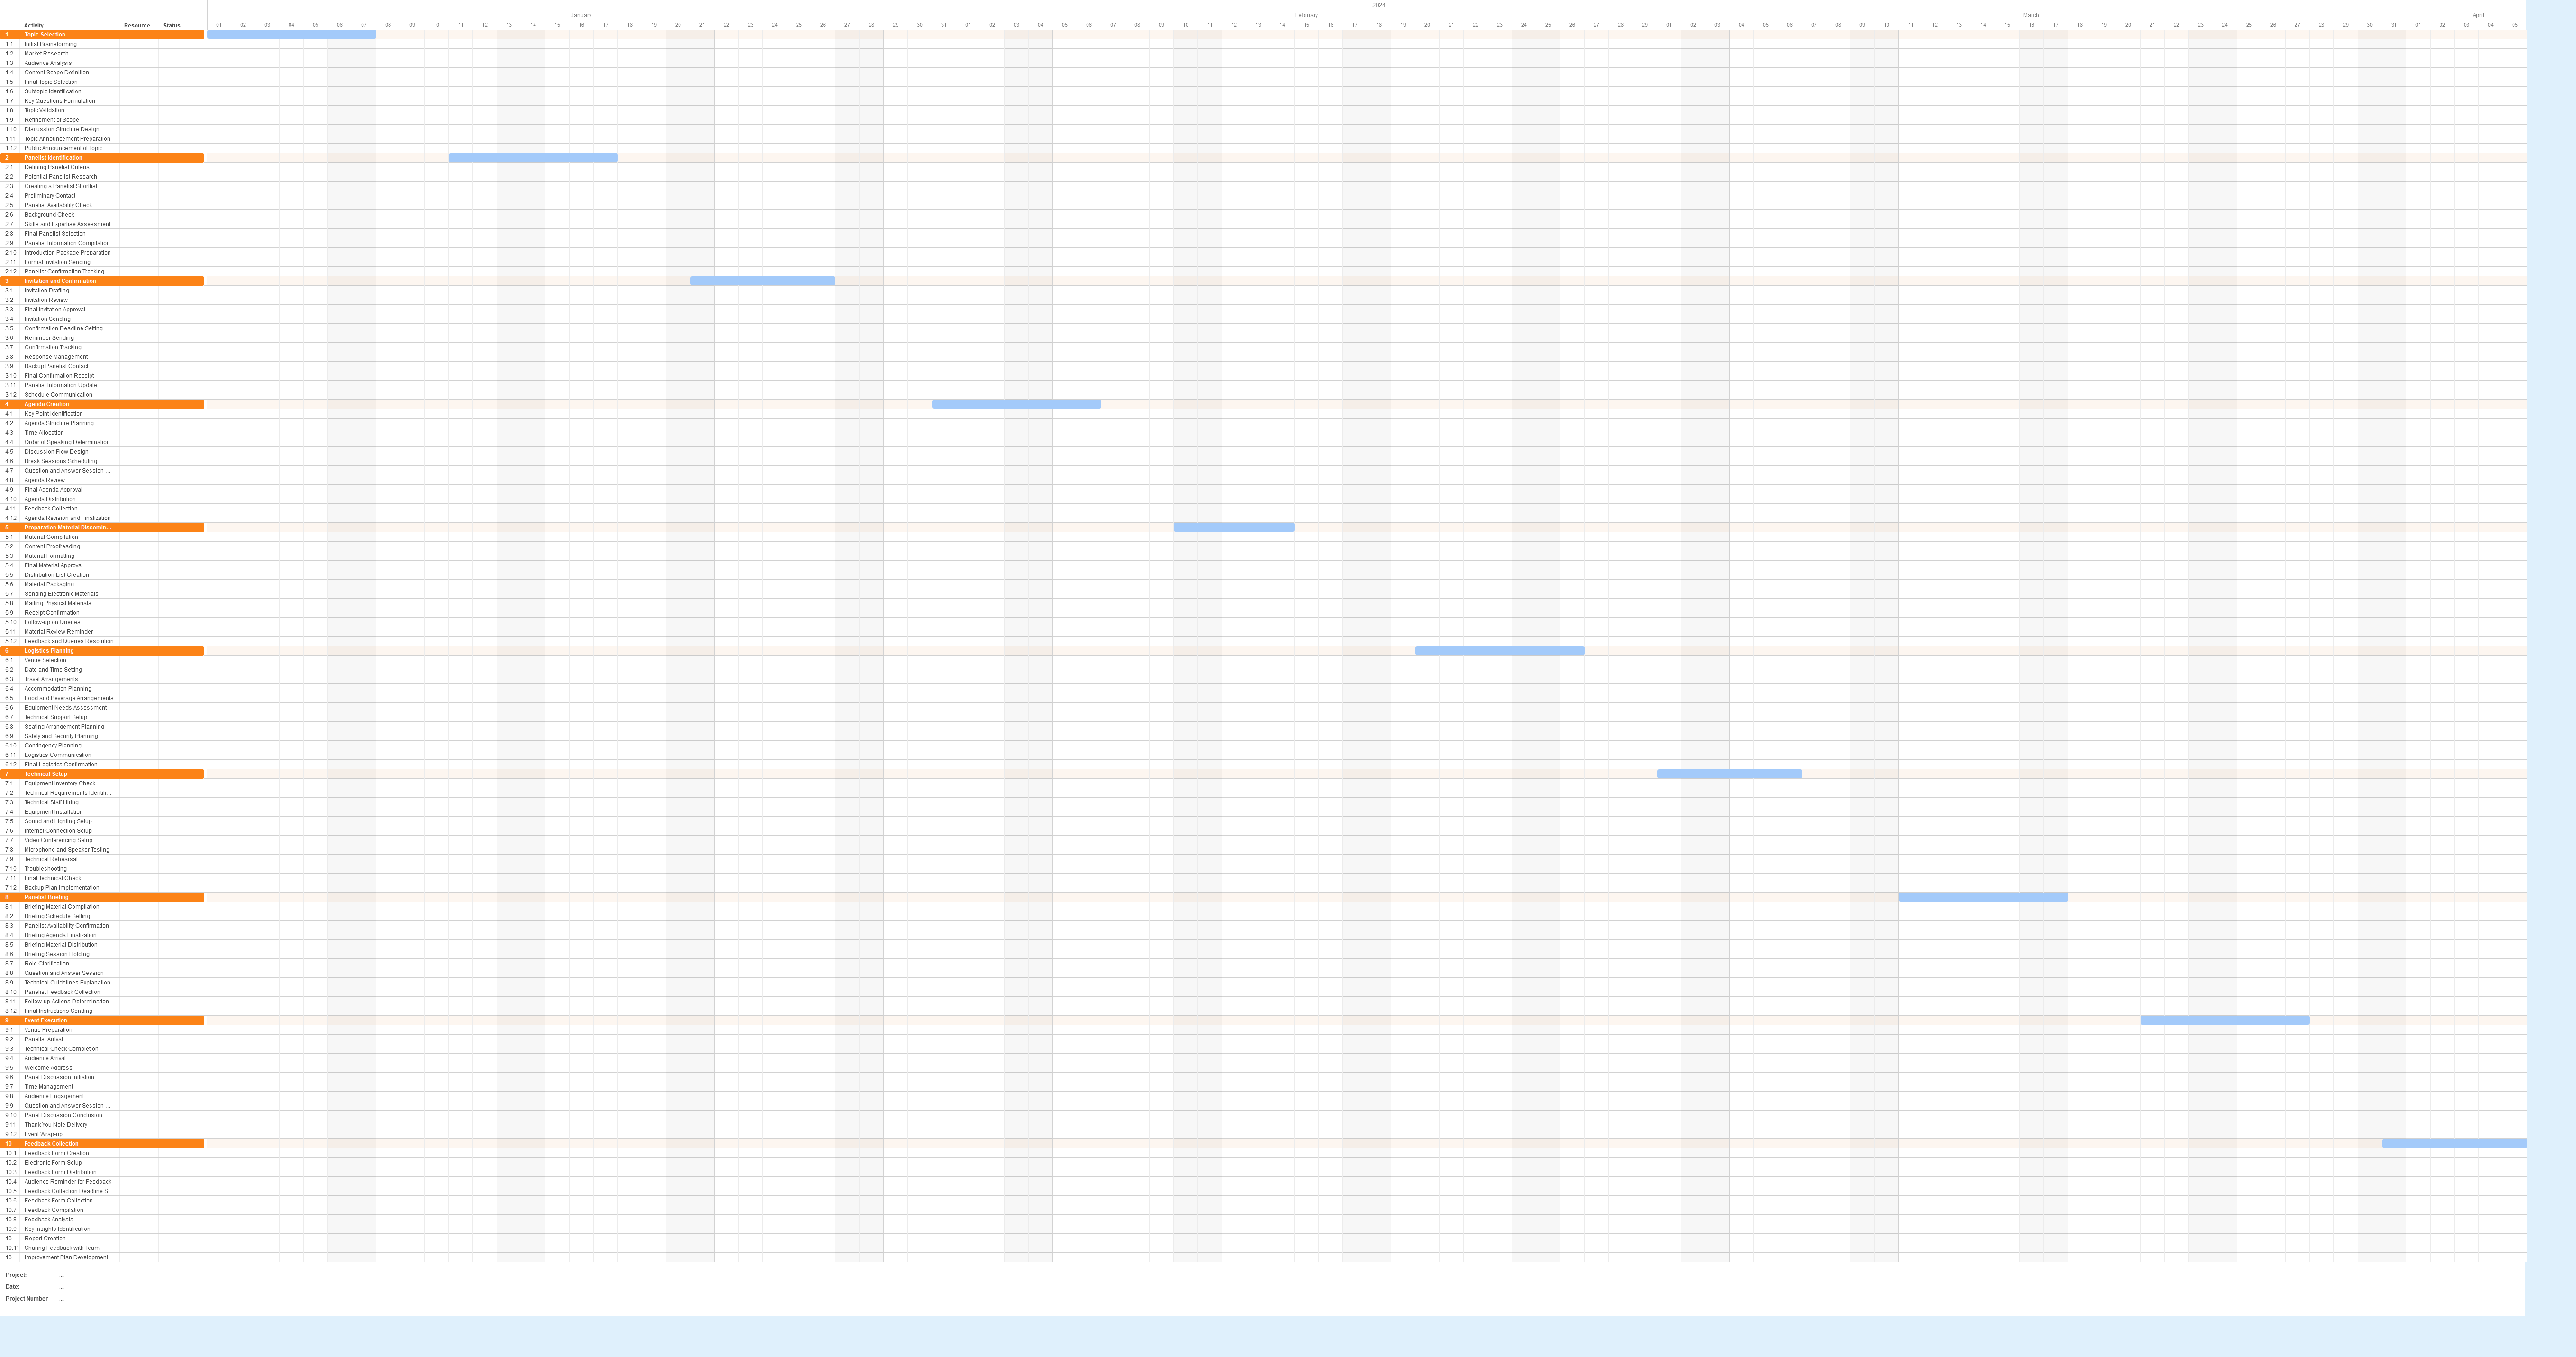 Gantt chart for a Panel Discussion project